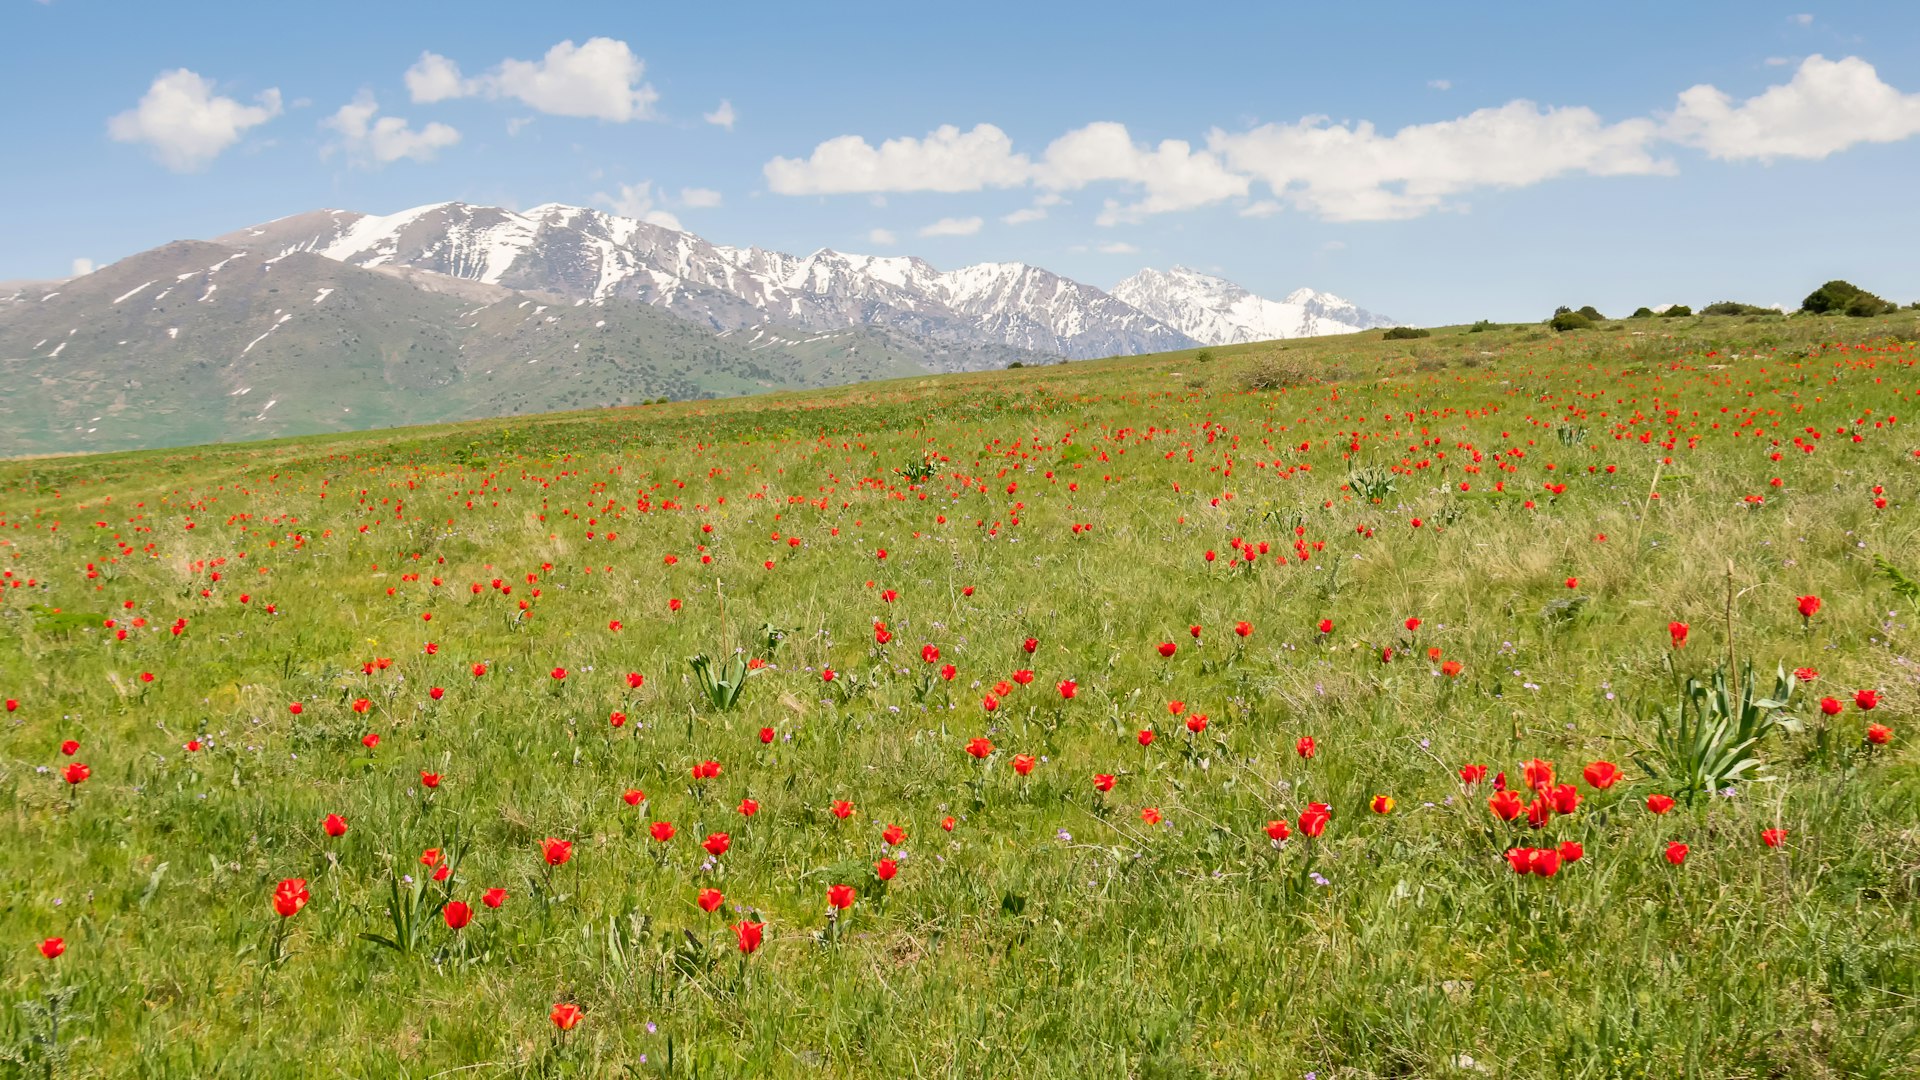 Wild tulips blooming in a meadow with the snow-capped Tian Shan mountains in the distance, Kazakhstan